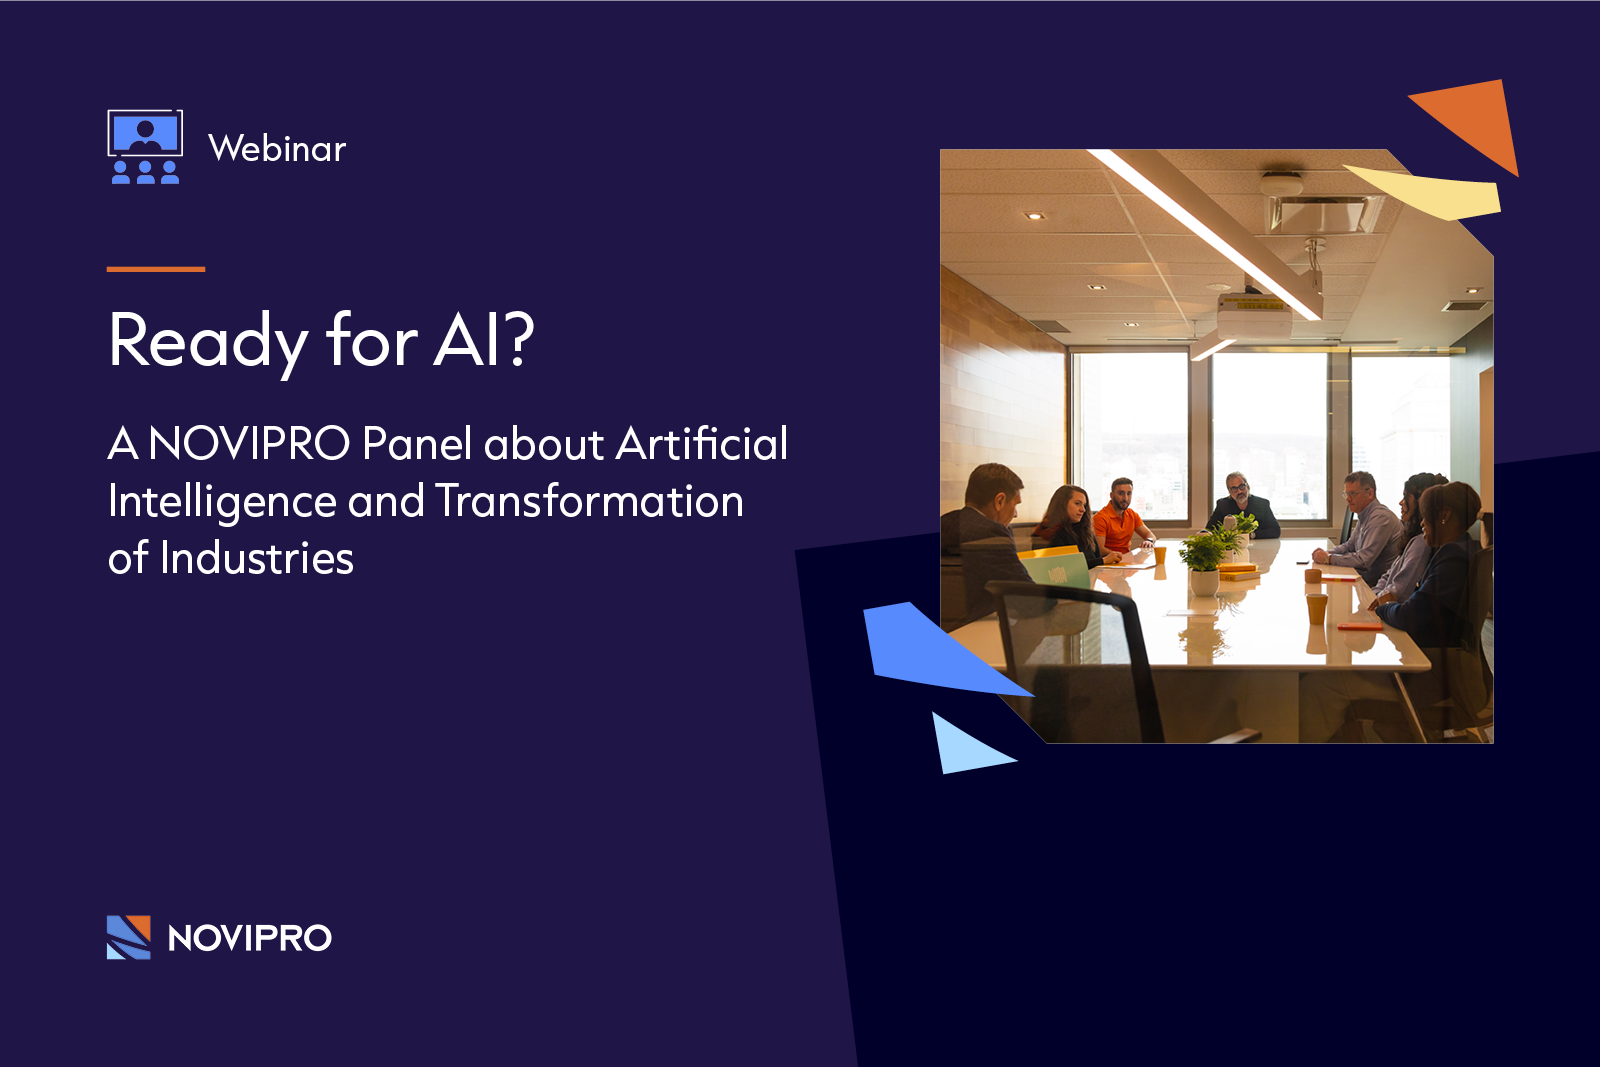 Ready for AI? A NOVIPRO panel about artificial intelligence and transformation of industries